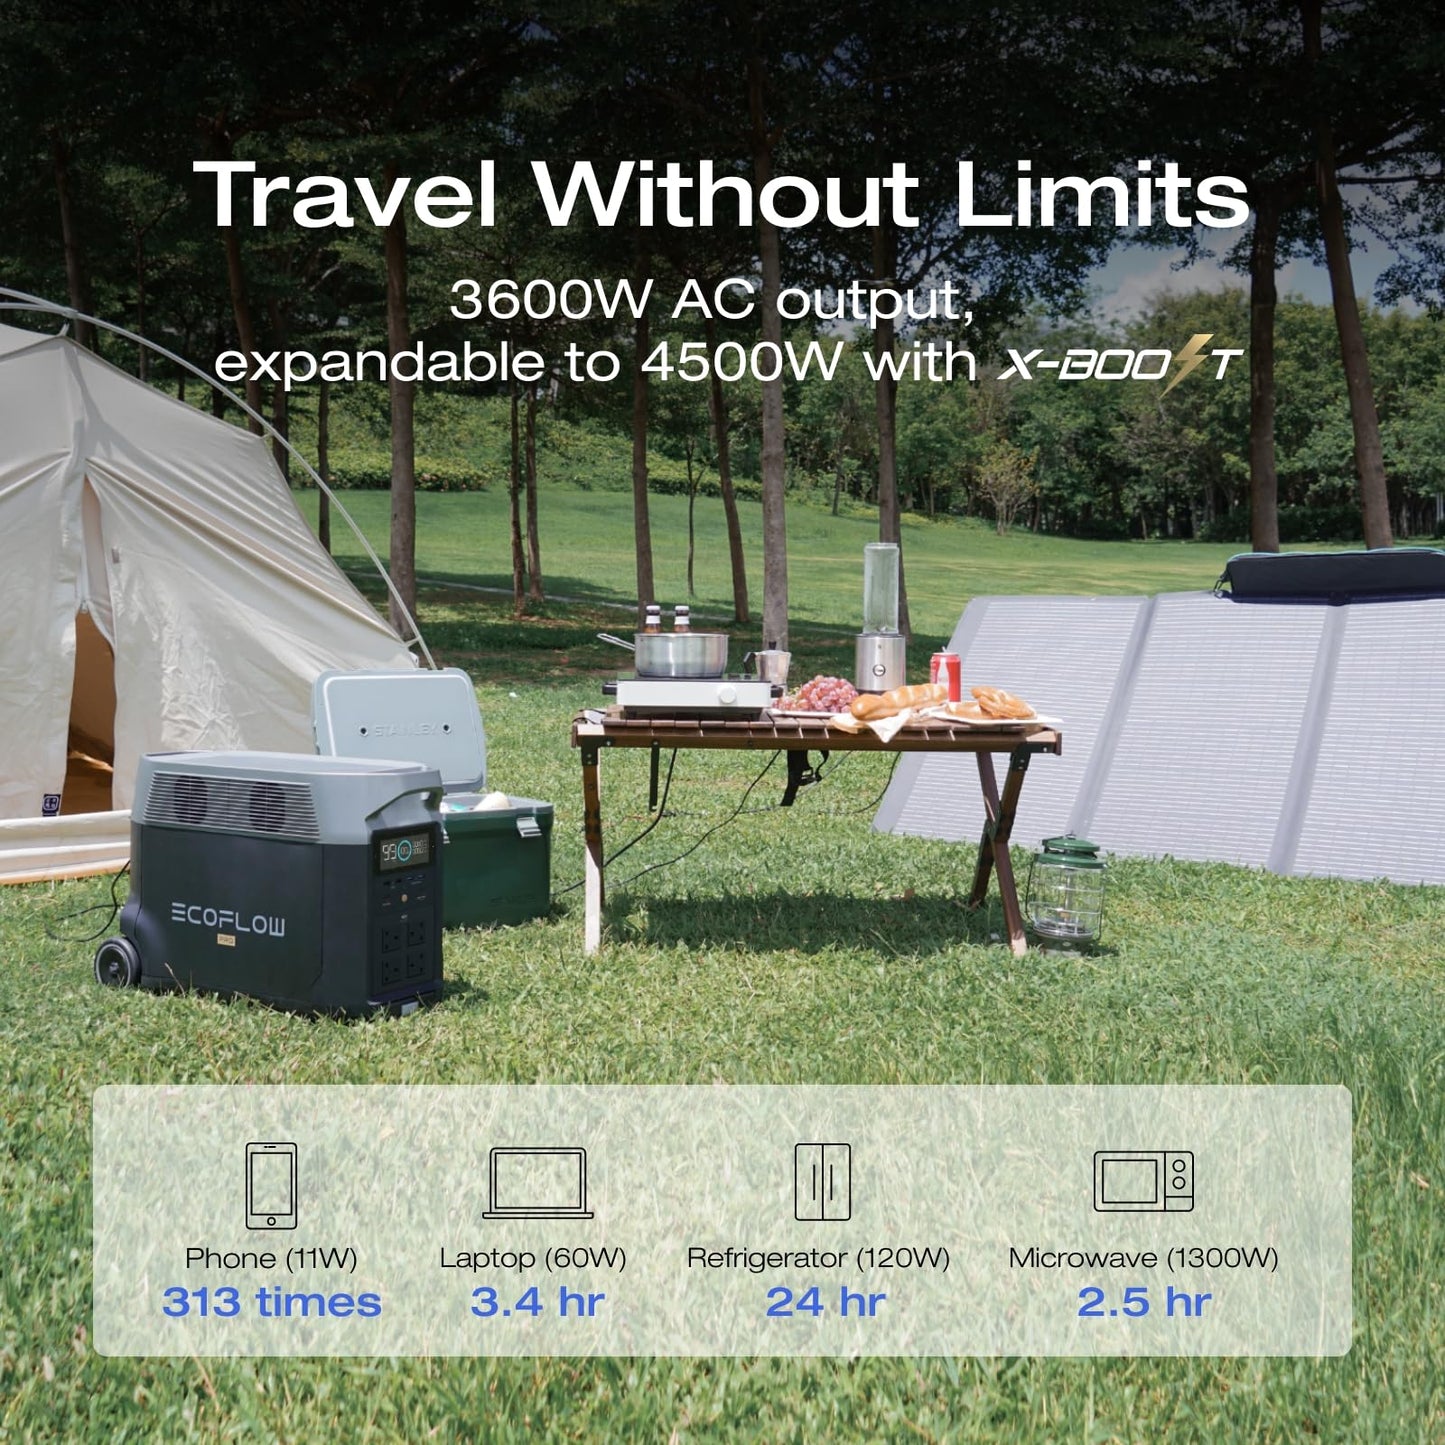 EF ECOFLOW Portable Power Station 3600Wh DELTA Pro, 120V AC Outlets x 5, 3600-4500W, 2.7H Fast Charge, Lifepo4 Power Station, Solar Generator for Home Use, Power Outage, Camping, RV, Emergencies